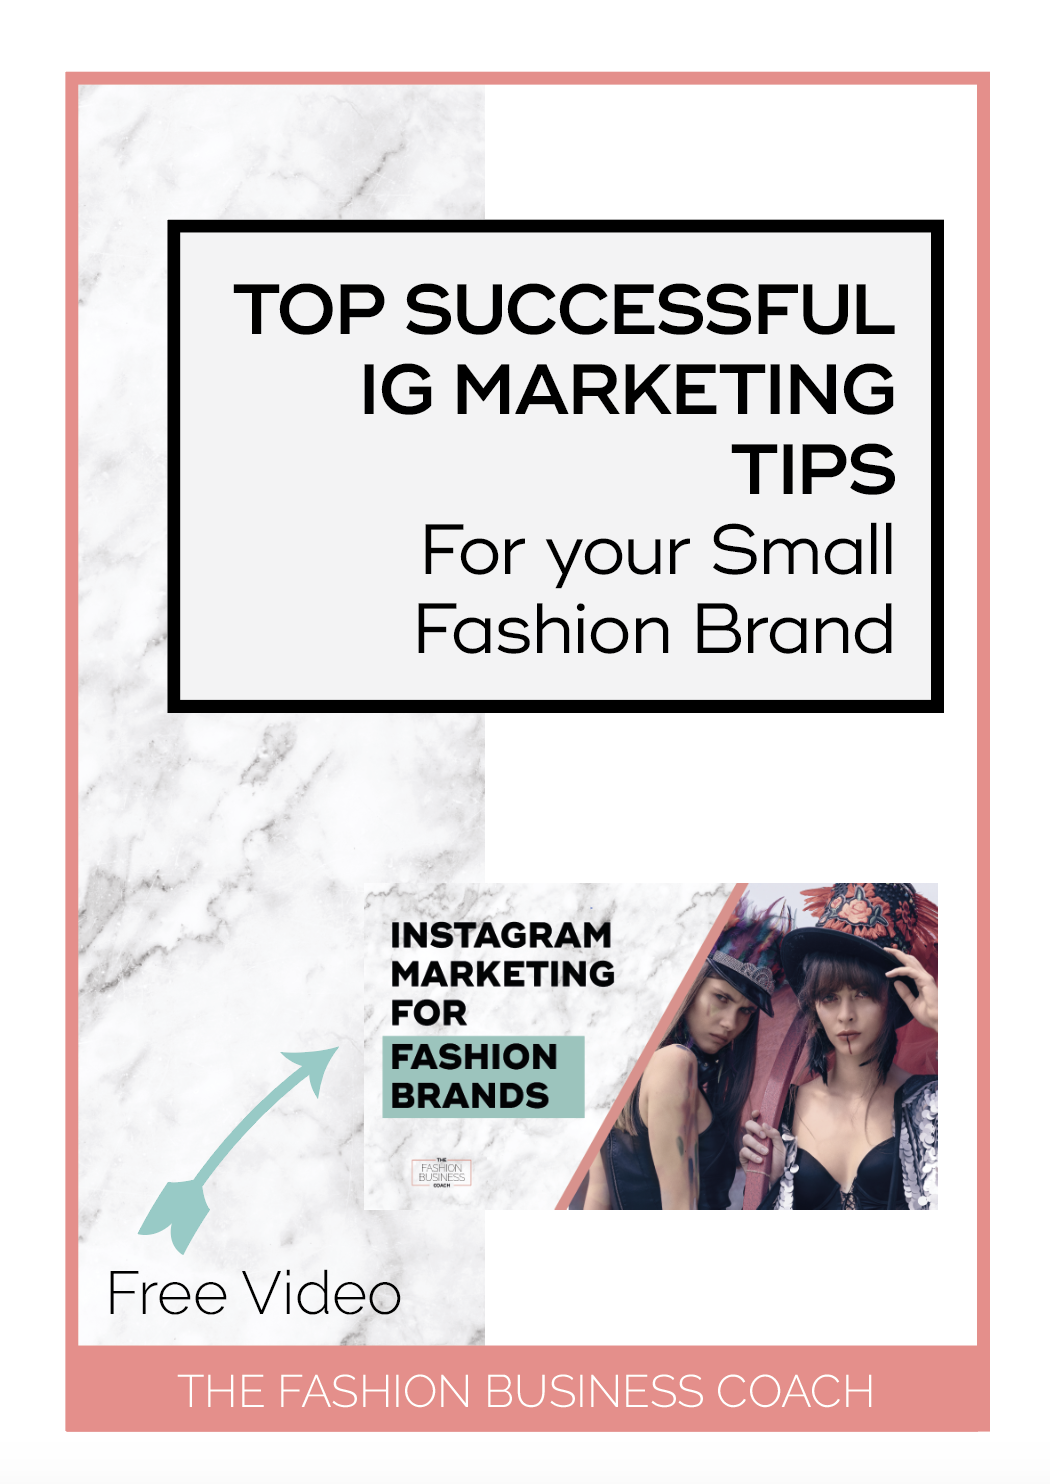 Top Successful IG Marketing Tips for your Small Fashion Brand 4.png